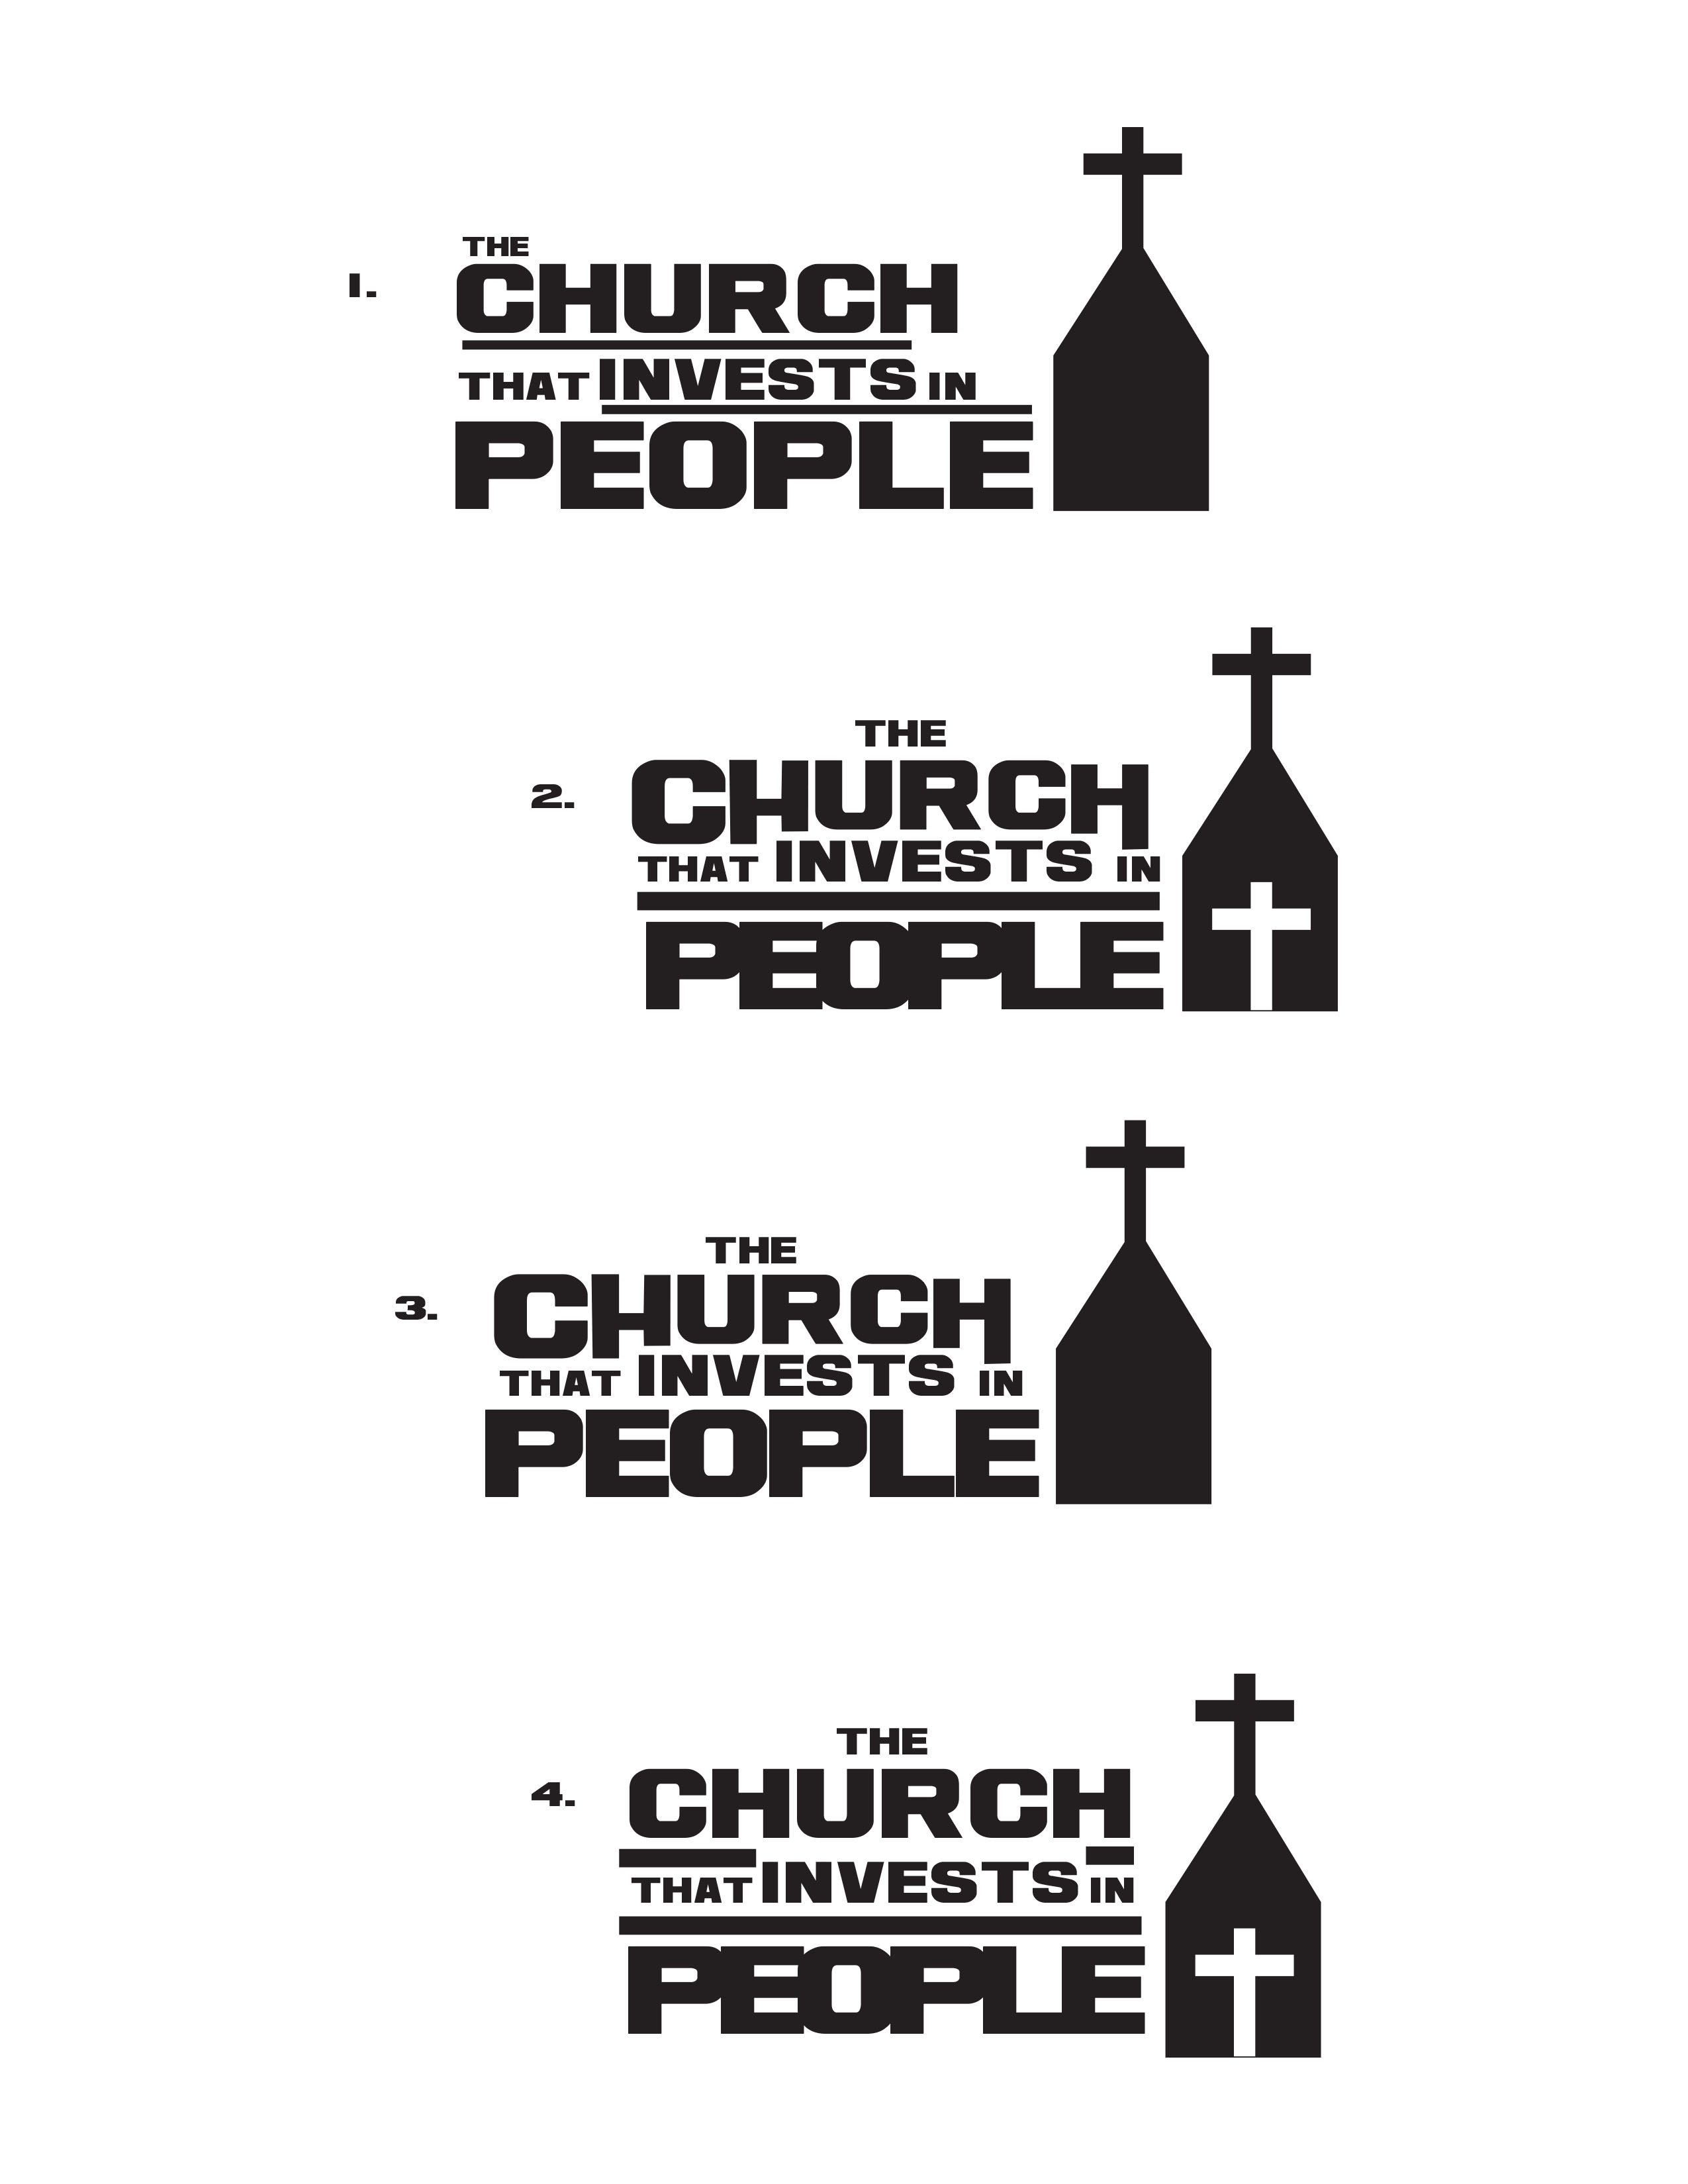 THE CHURCH THAT INVESTS IN PEOPLE